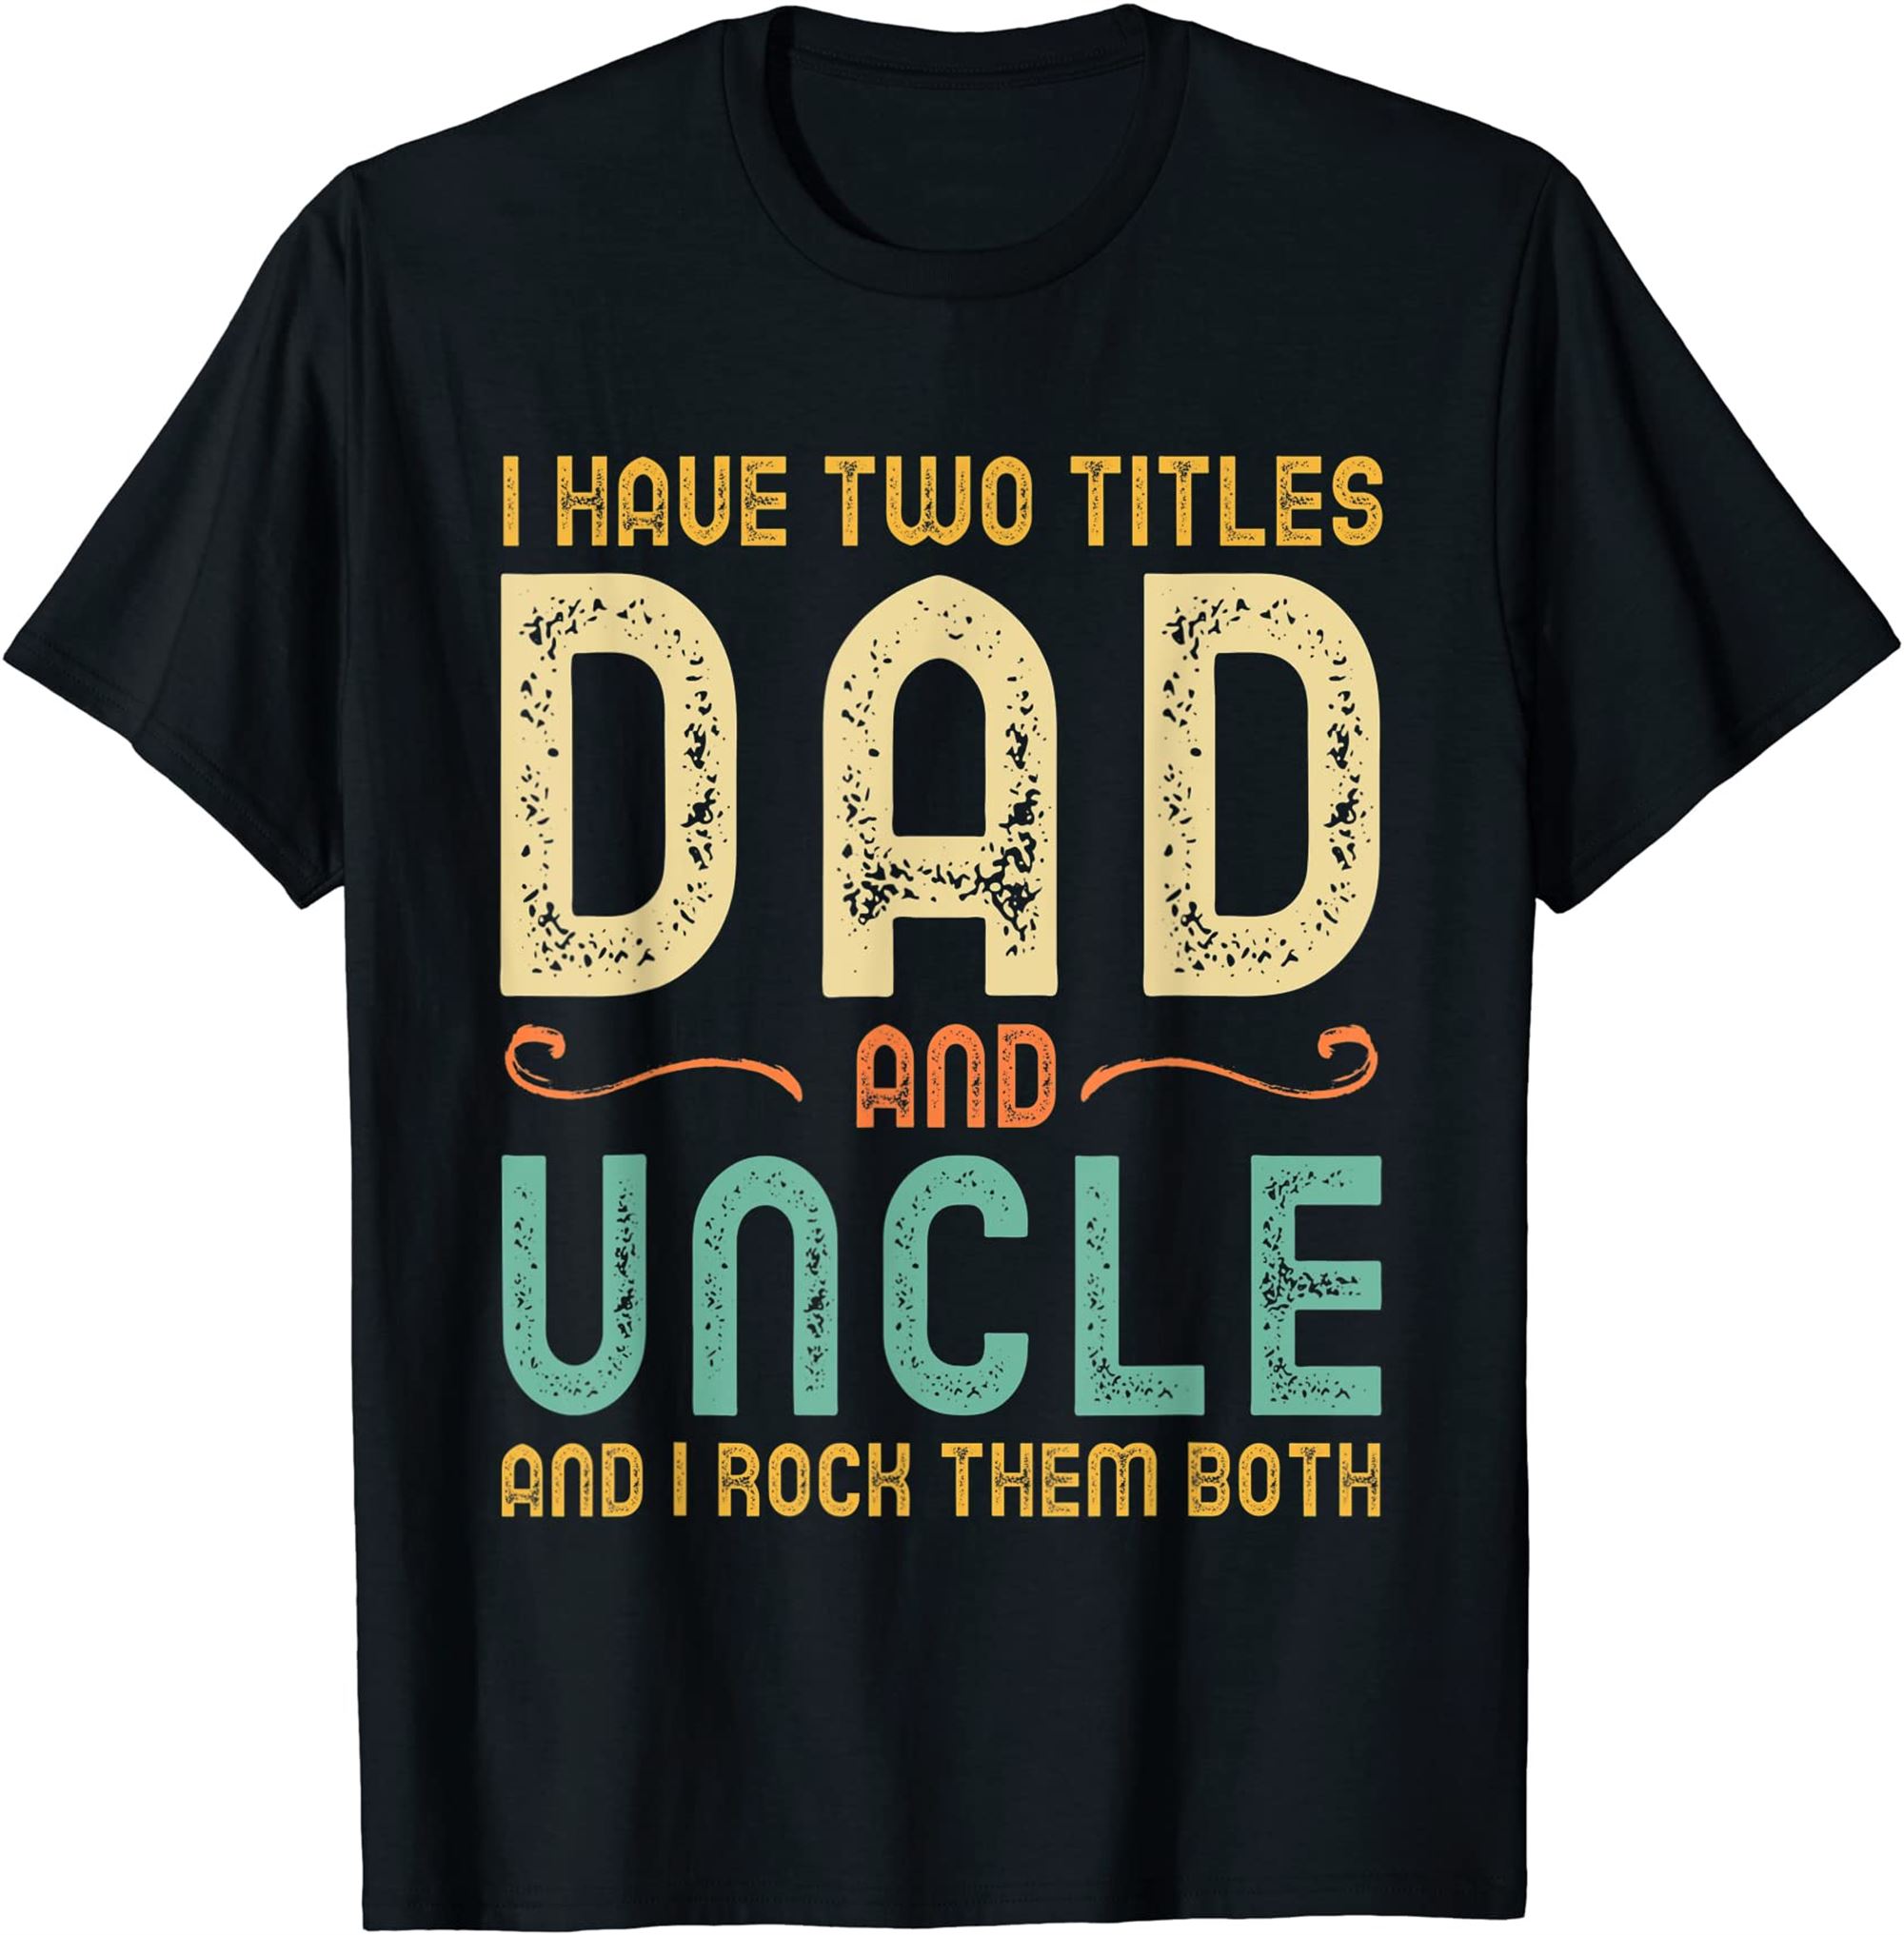 I Have Two Titles Dad And Uncle Retro Vintage T-shirt Plus Size Up To 5xl